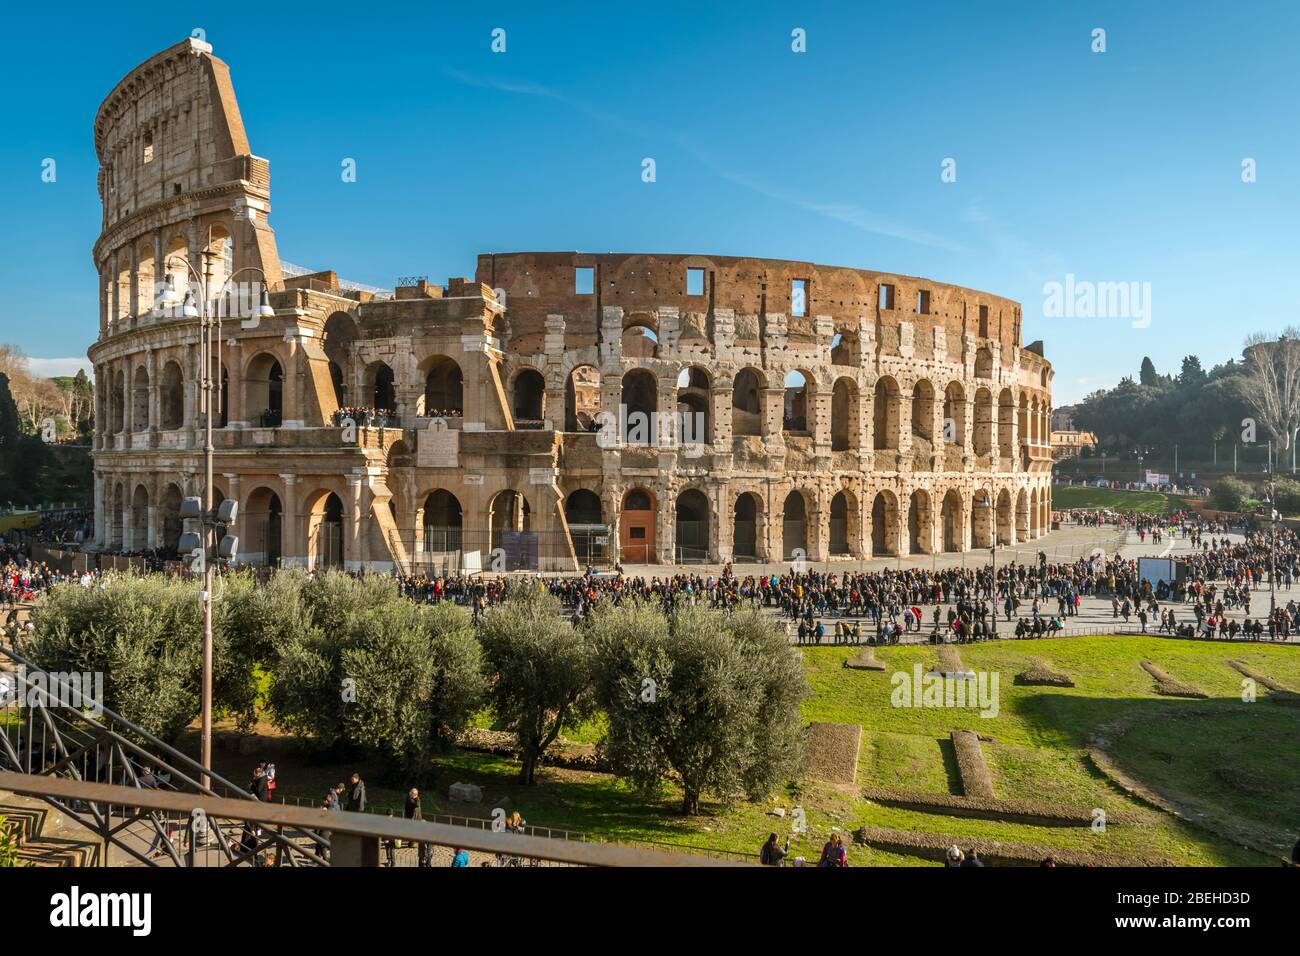 Rome forum view before COVID-19 Stock Photo